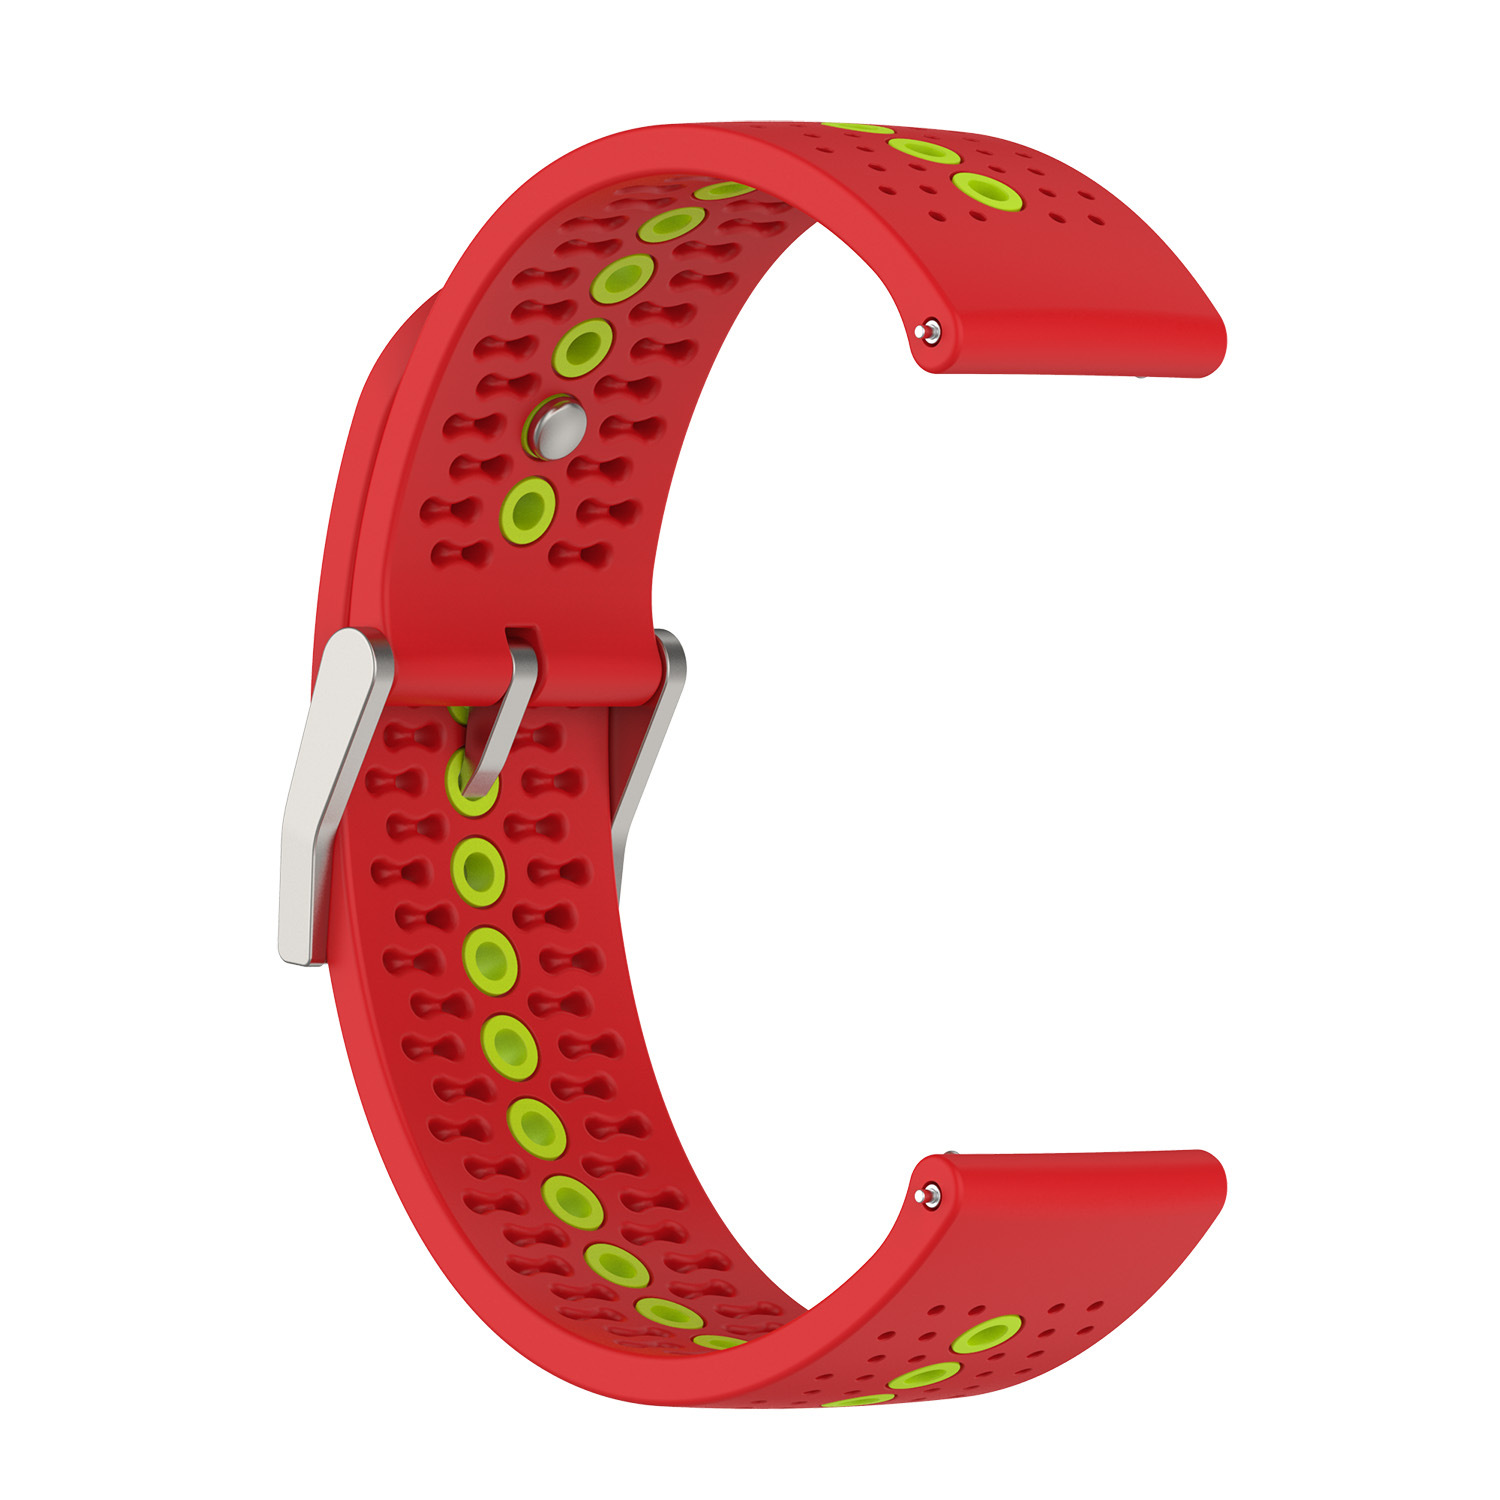 Bakeey-22MM-Universal--Colorful-Silicone-Watch-Band-Strap-Replacement-for-Huawei-Watch3--Huawei-GT2--1893593-14